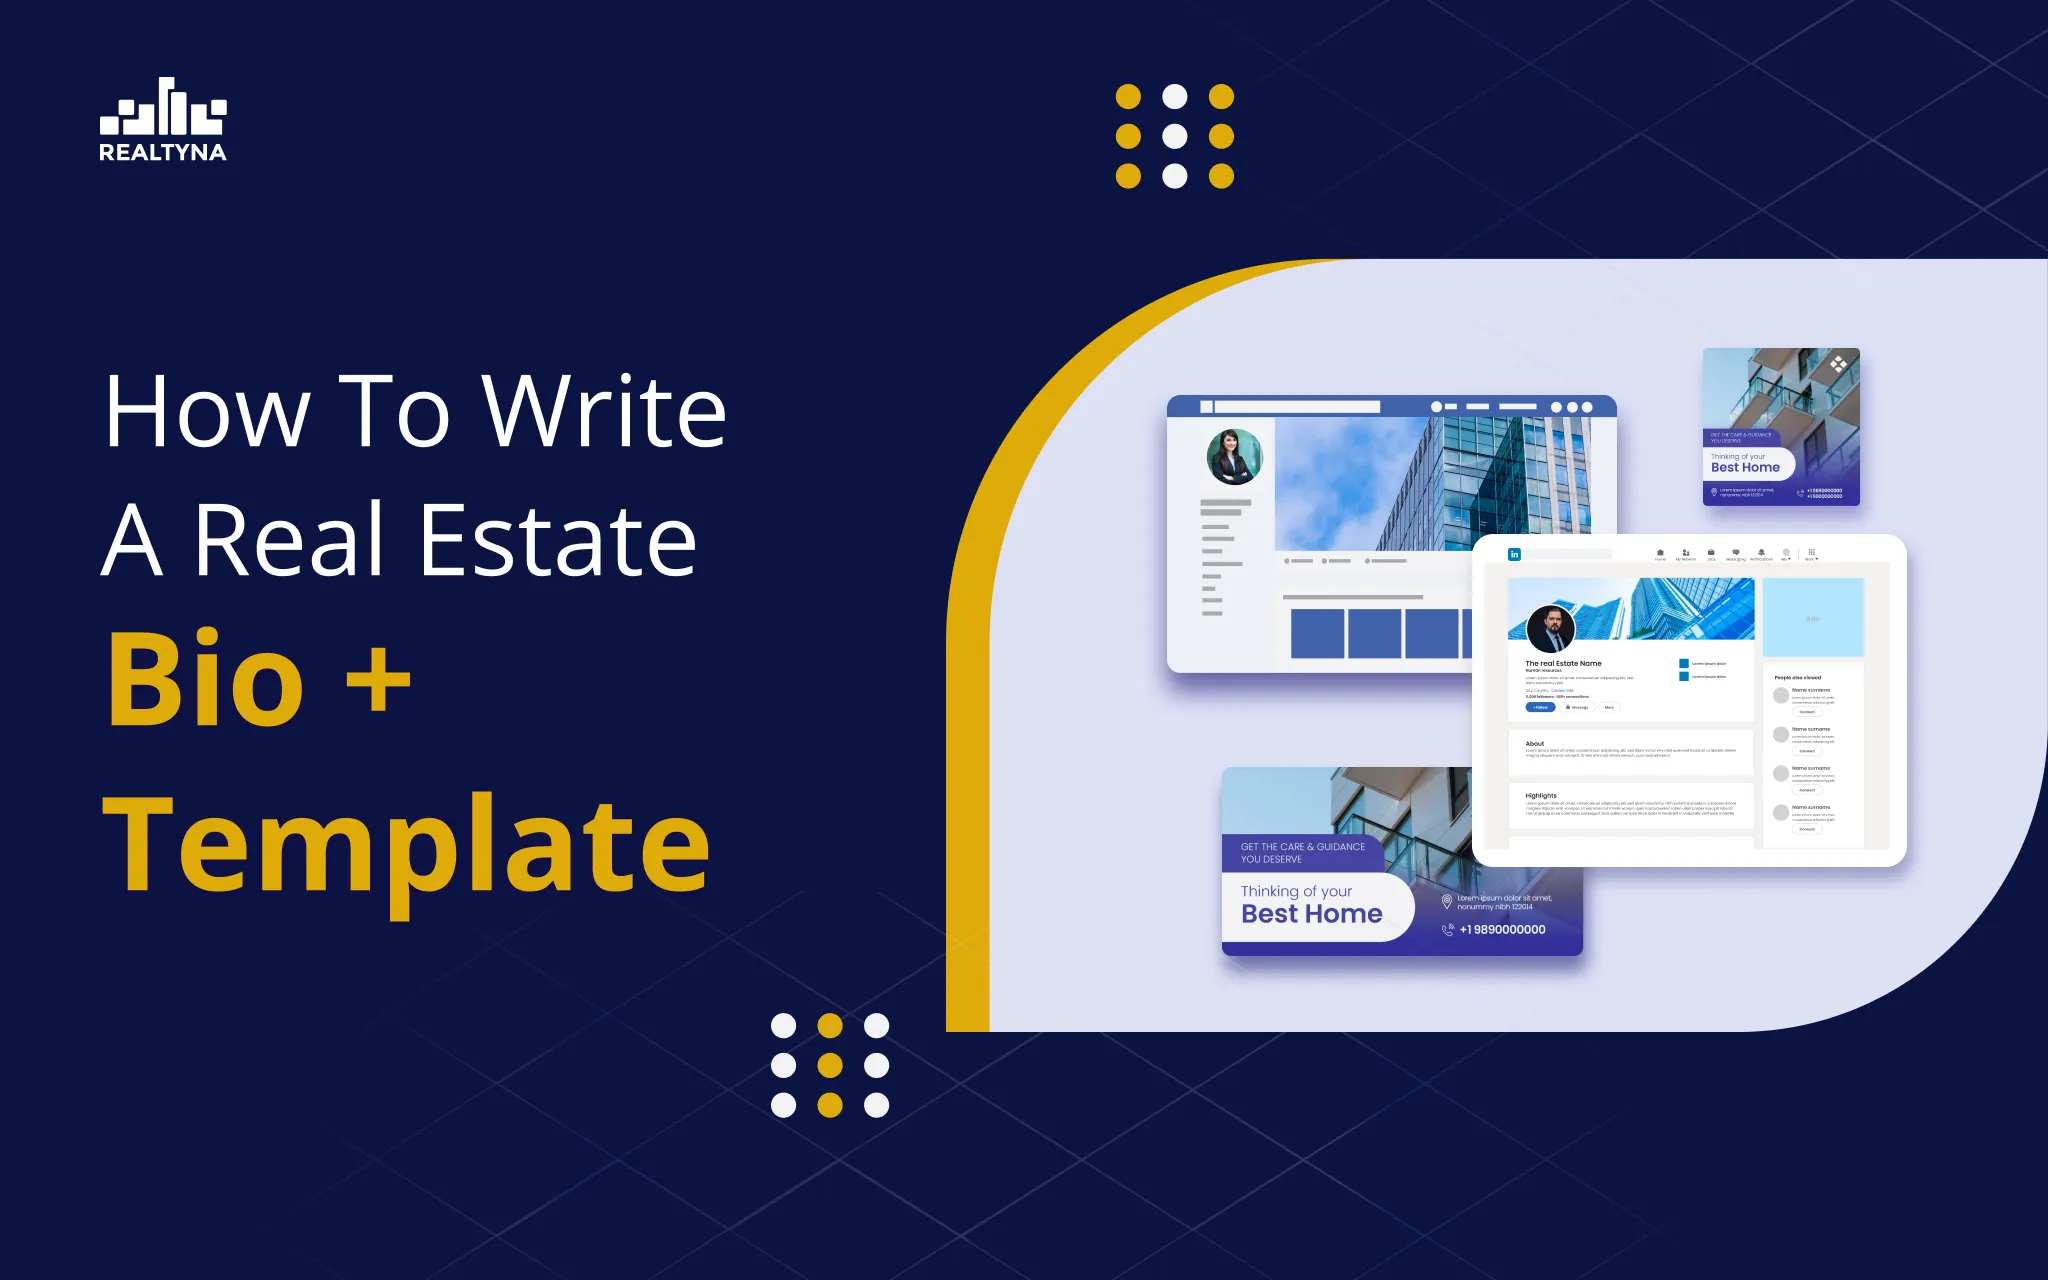 How To Write A Real Estate Bio + Template